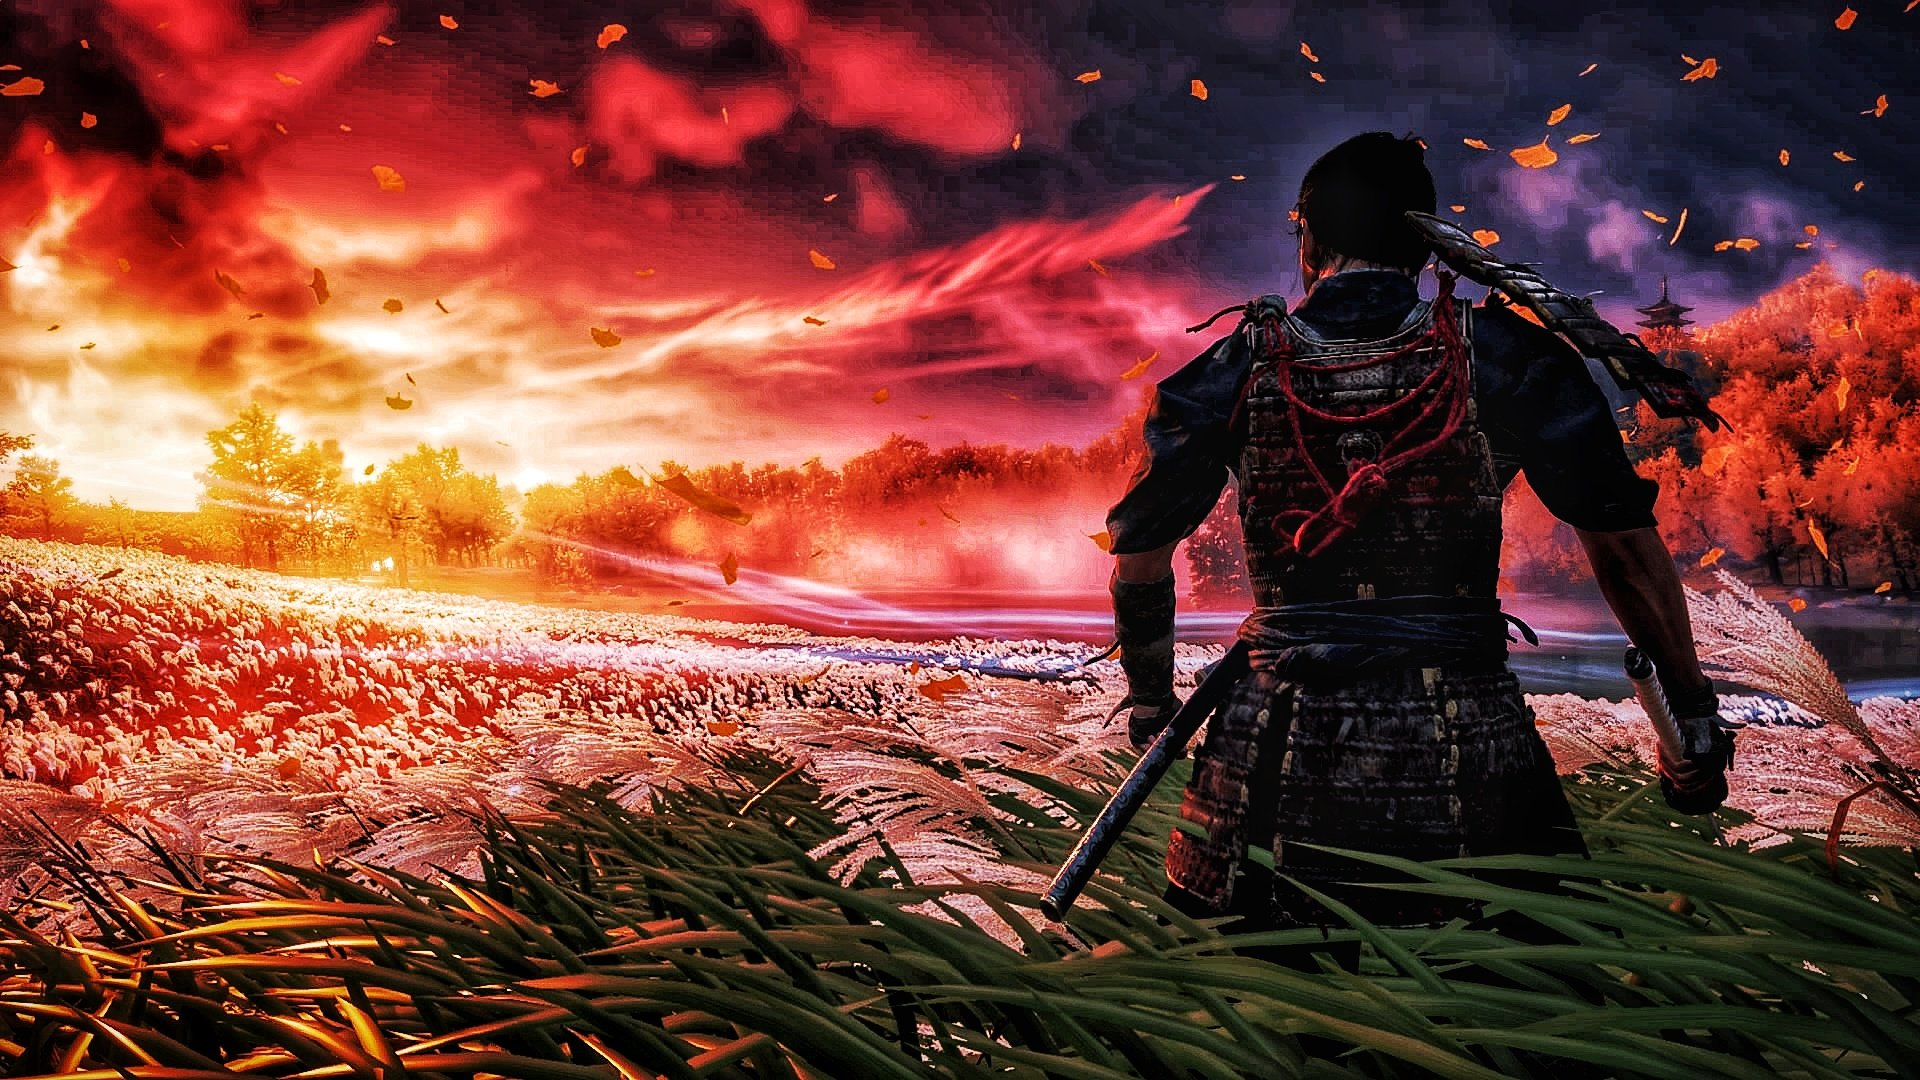 Ghost of Tsushima Wallpapers